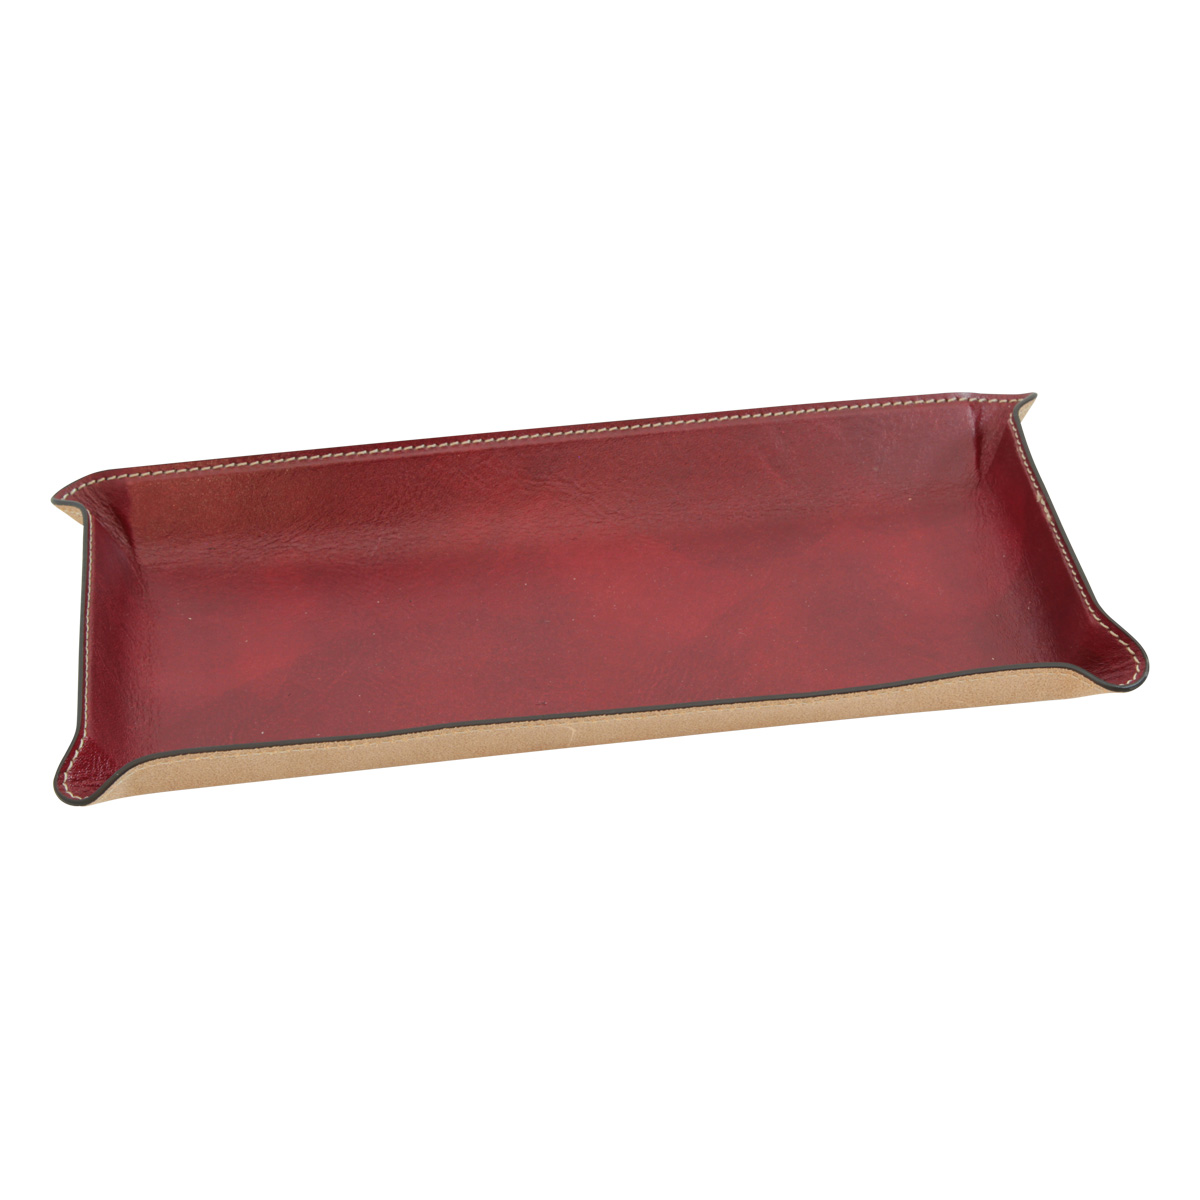 Leather desk tray - red | 762089RO US | Old Angler Firenze